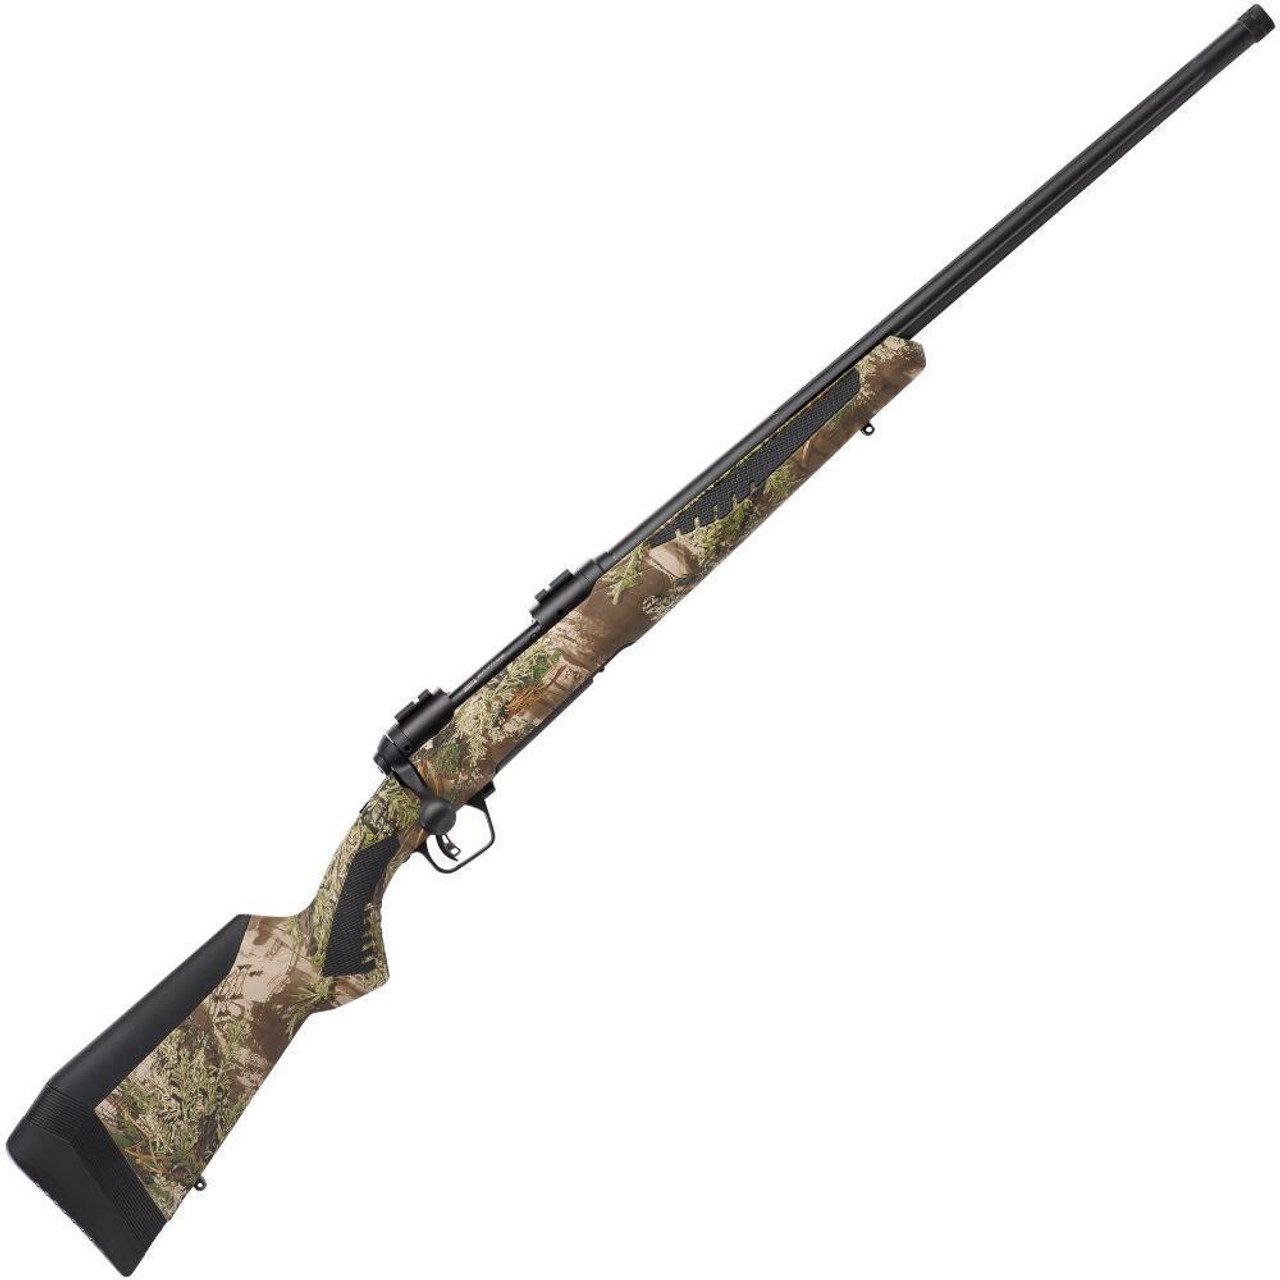 Savage 57003 110 Predator Bolt Action Rifle, 243 Win, 24" Thrd Heavy Bbl, 4 Rnd, Real Tree Camo Syn, AccuTrigger, AccuFit, 0685-1947